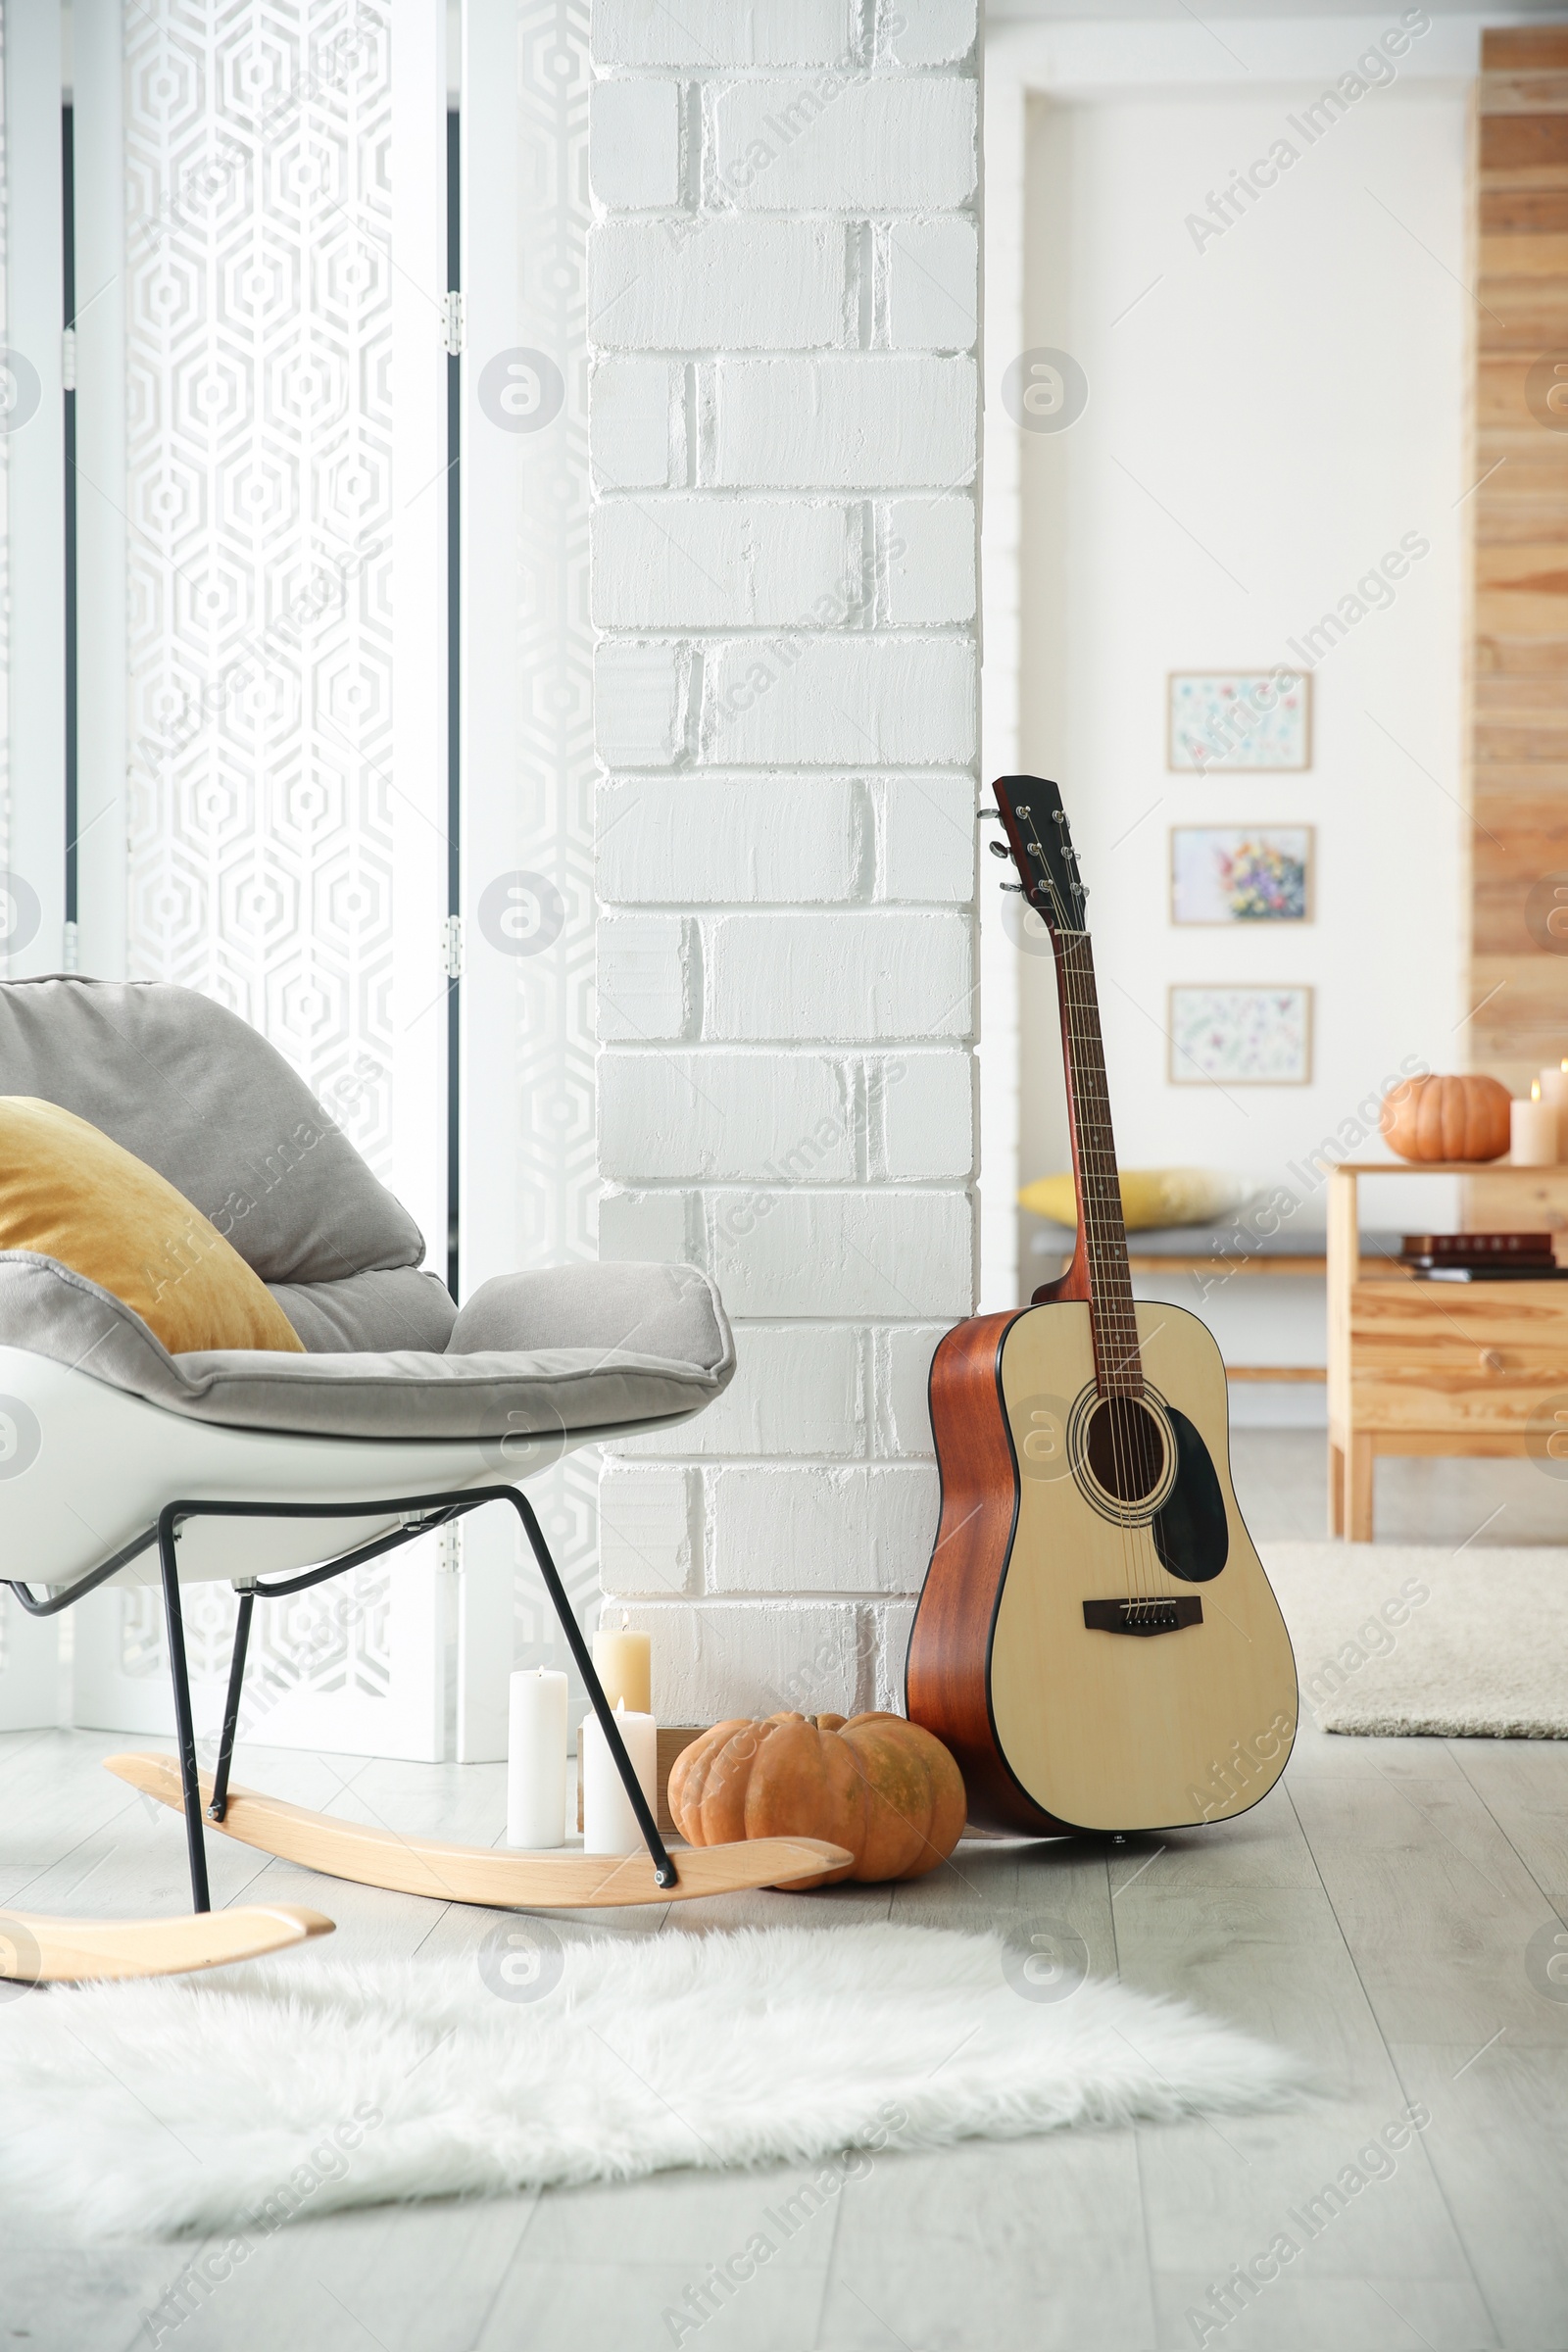 Photo of Cozy room interior with rocking chair, guitar and autumn decor